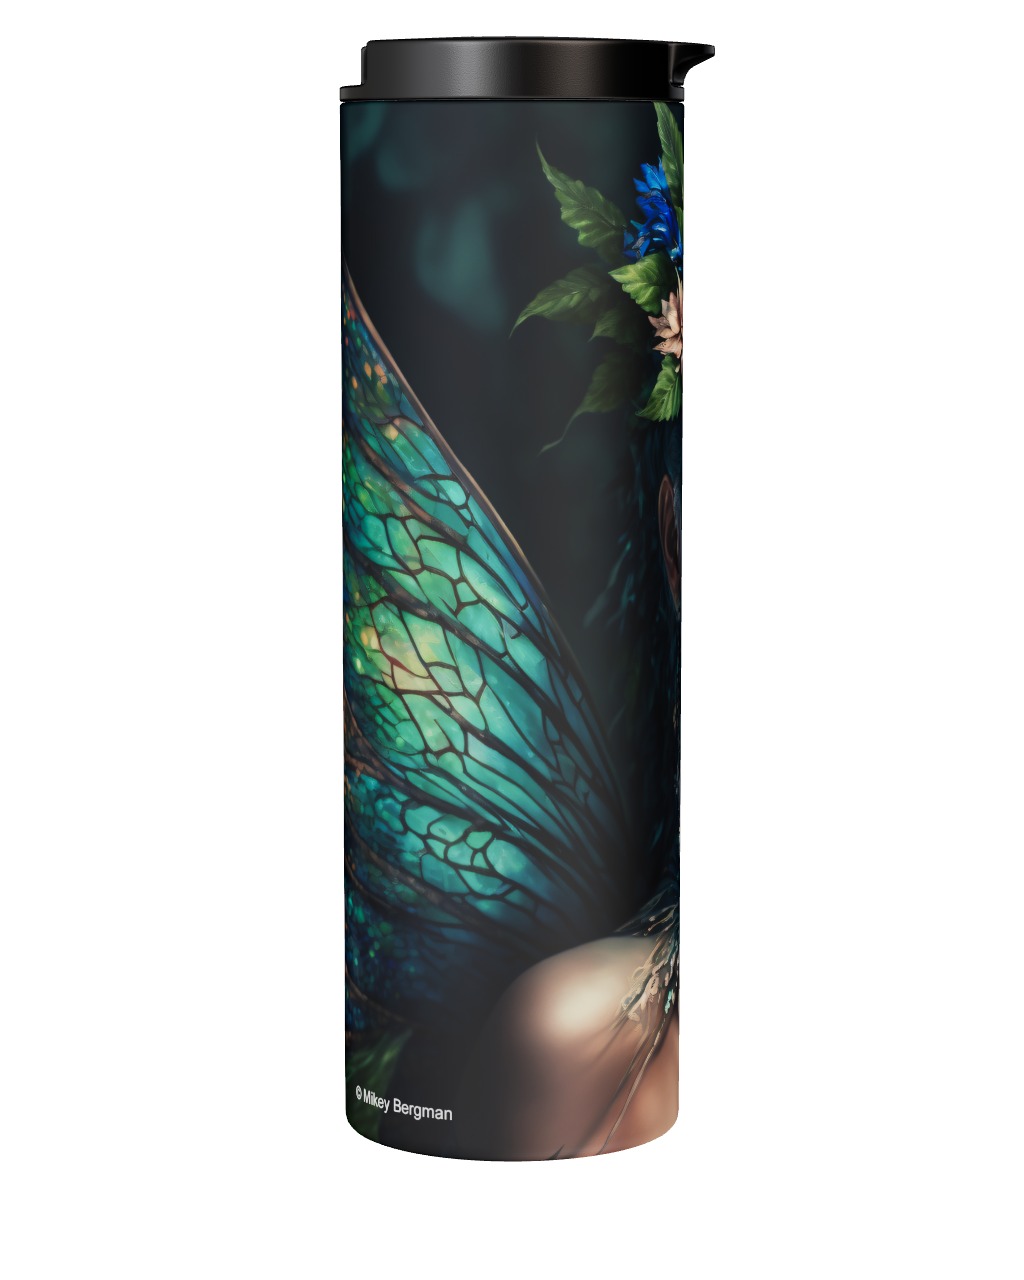 Miss Faerie Pageant Tumbler